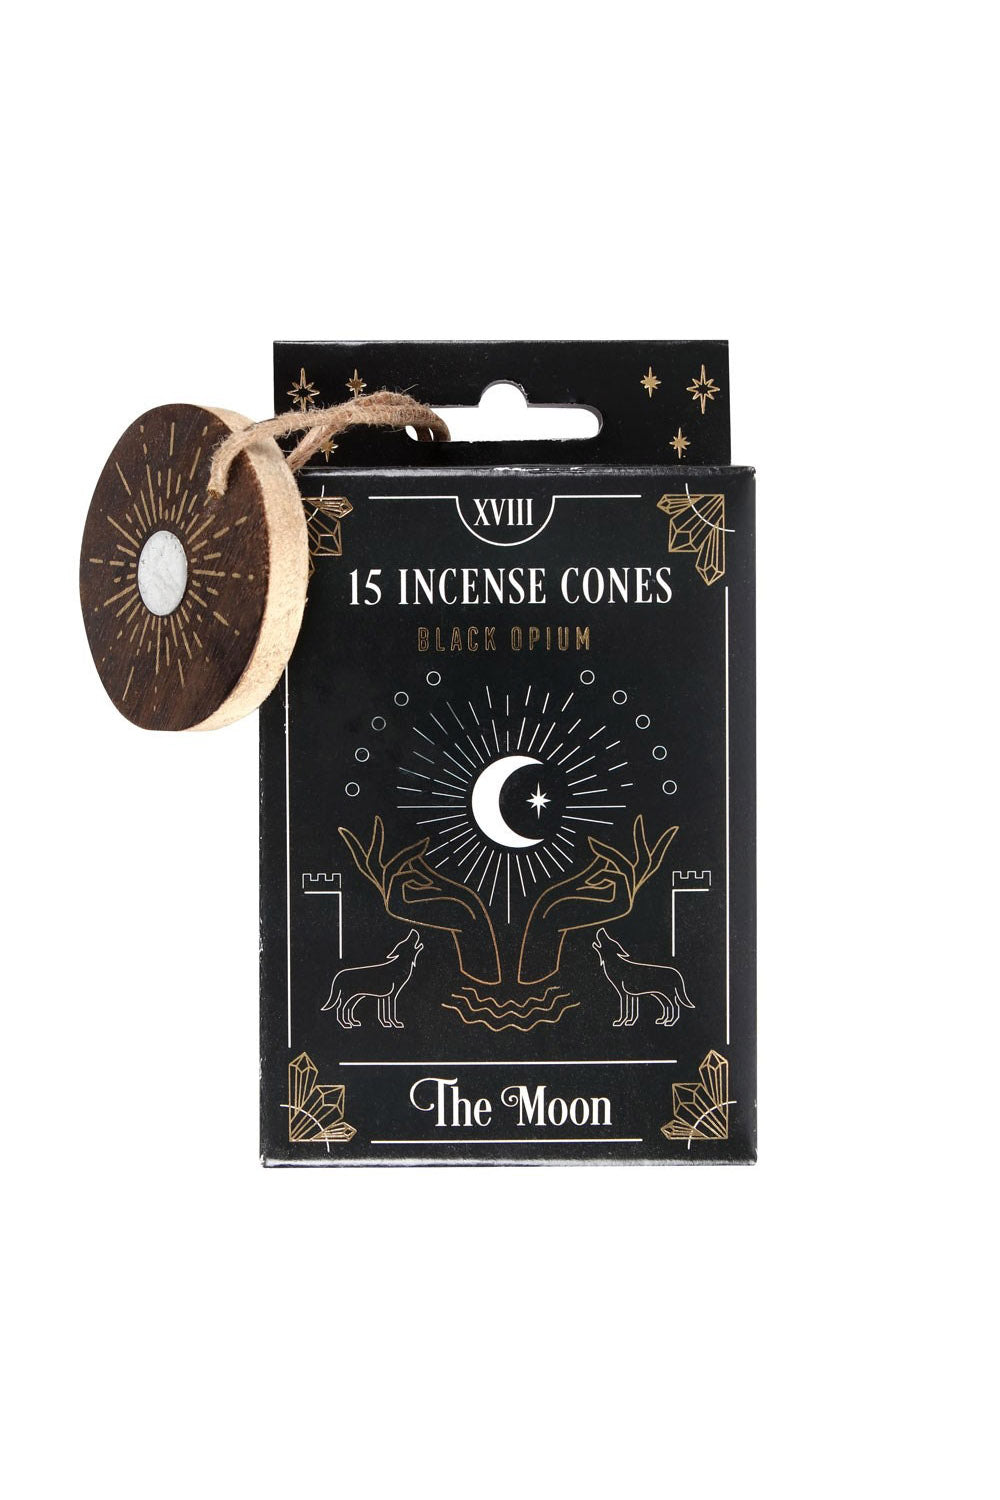 gothic occult incense cones by pacific giftware